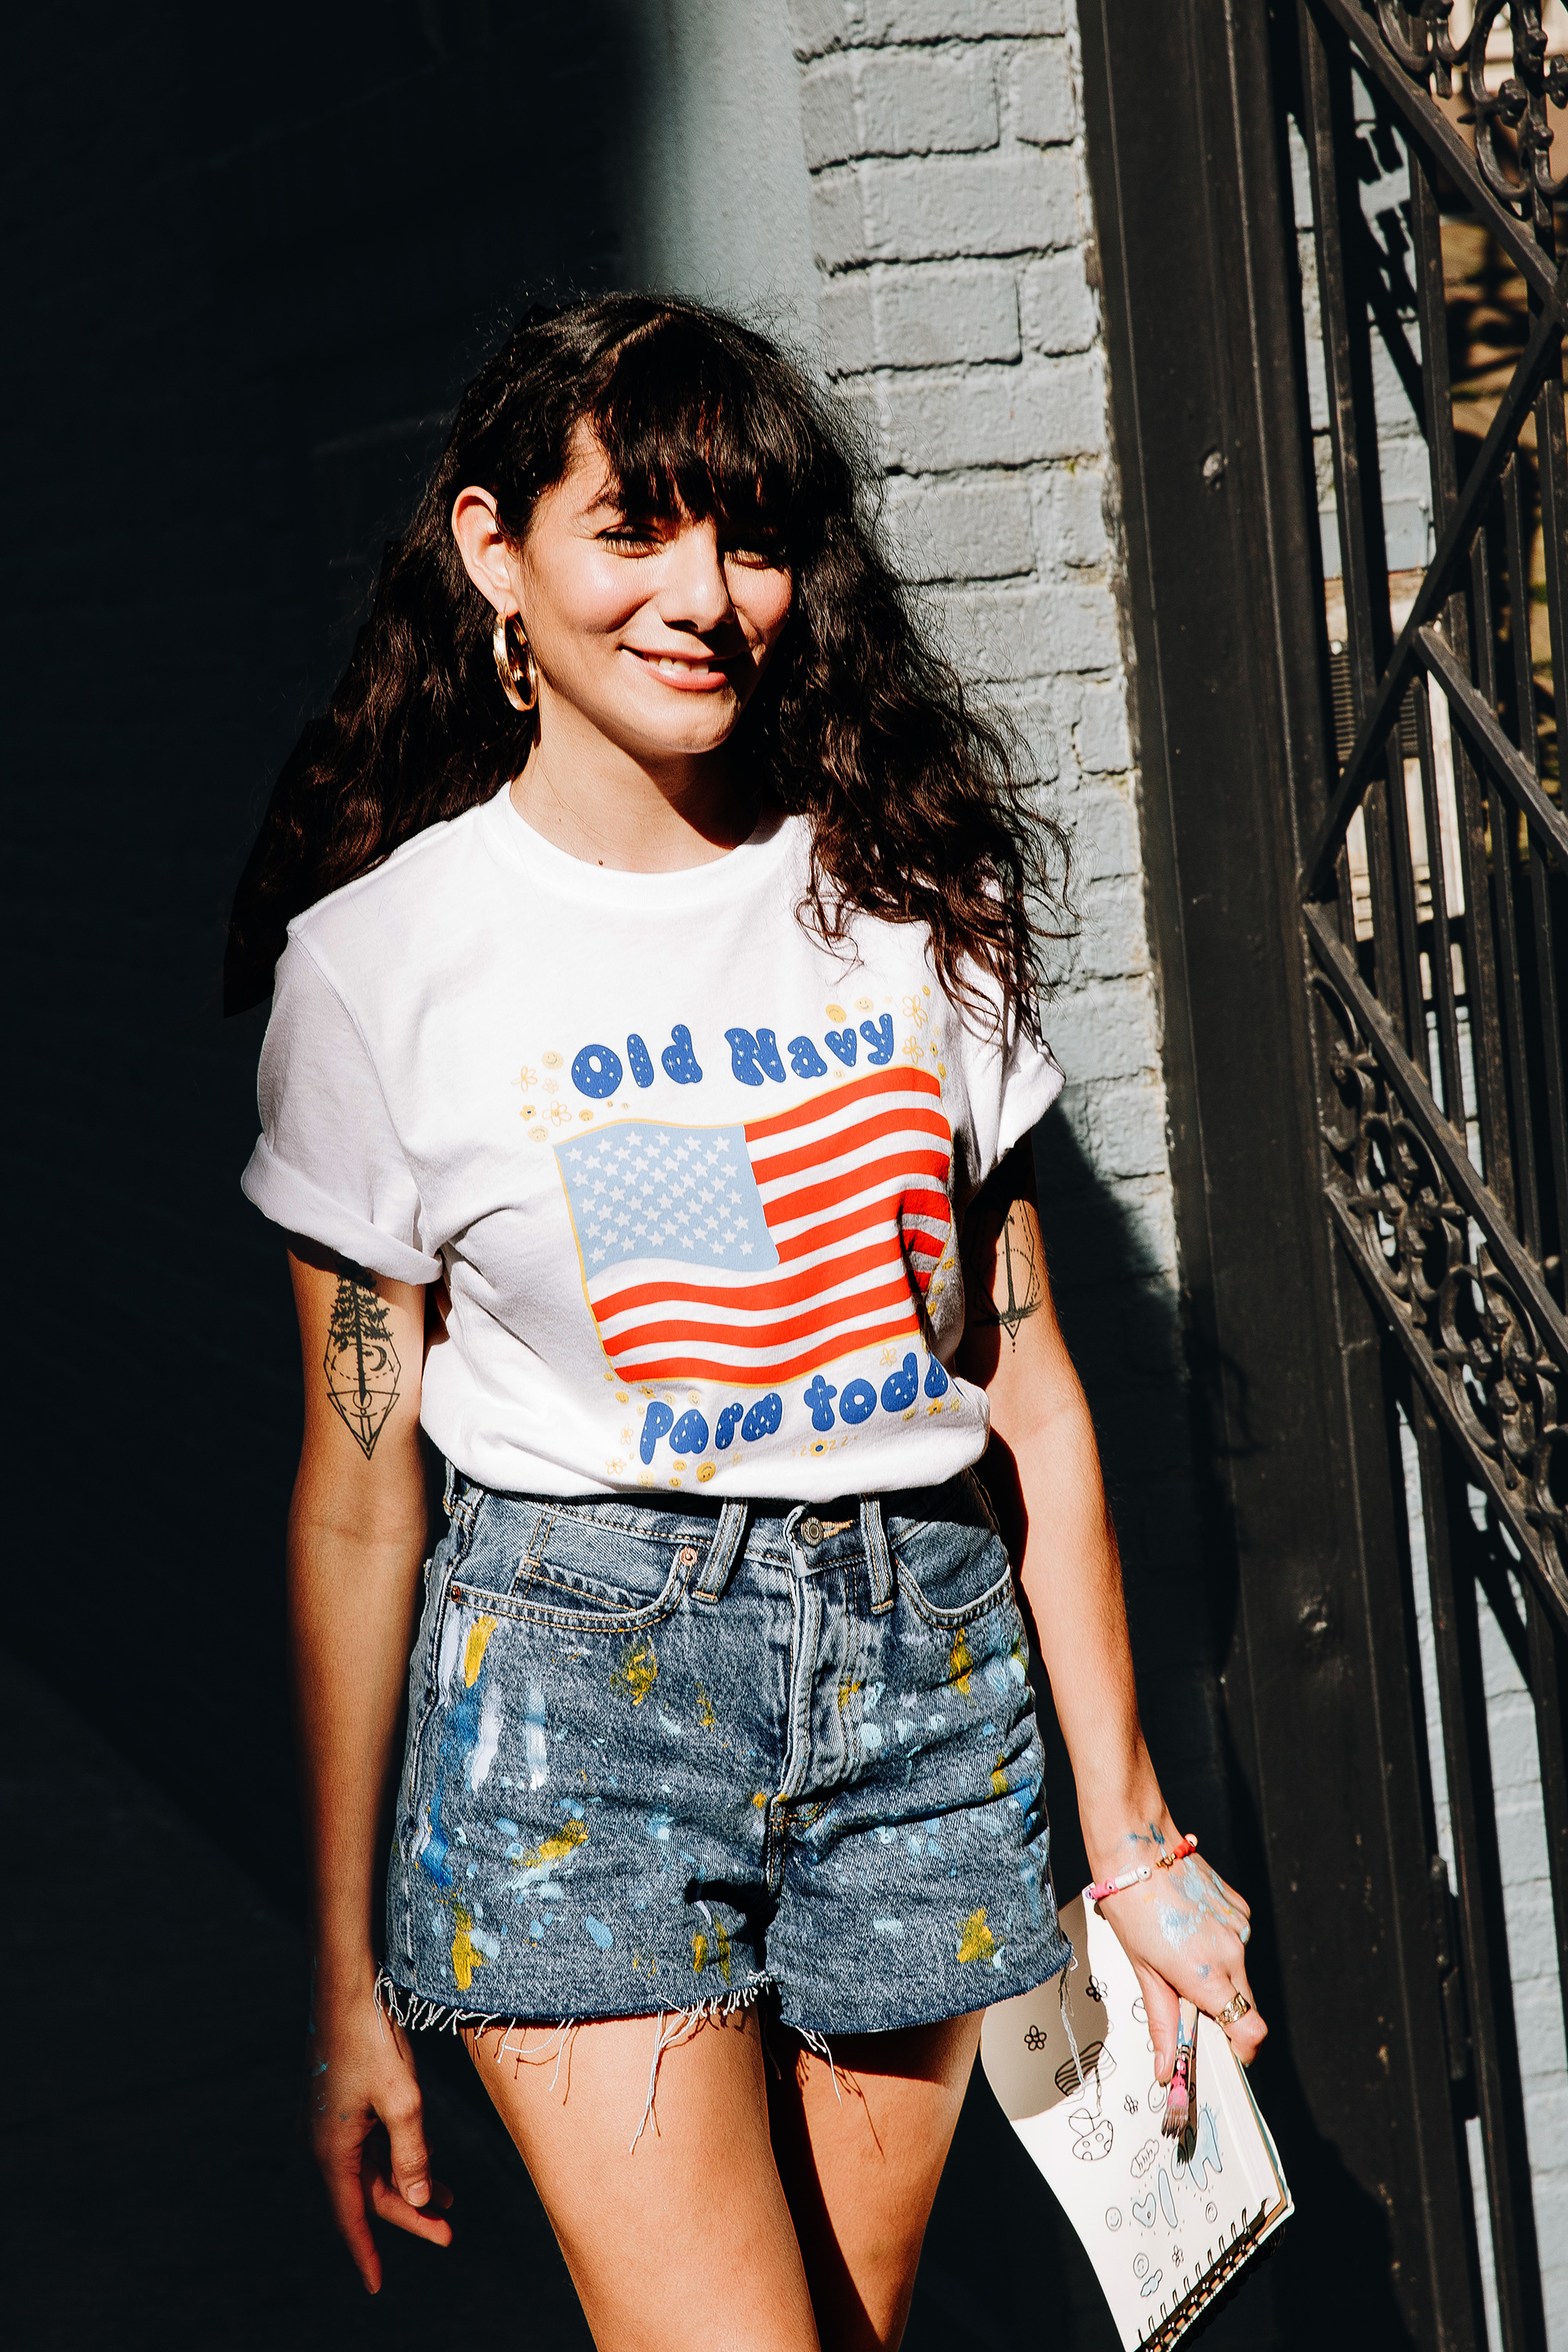 Old Navy Broadens Representation this Fourth of July with Expanded